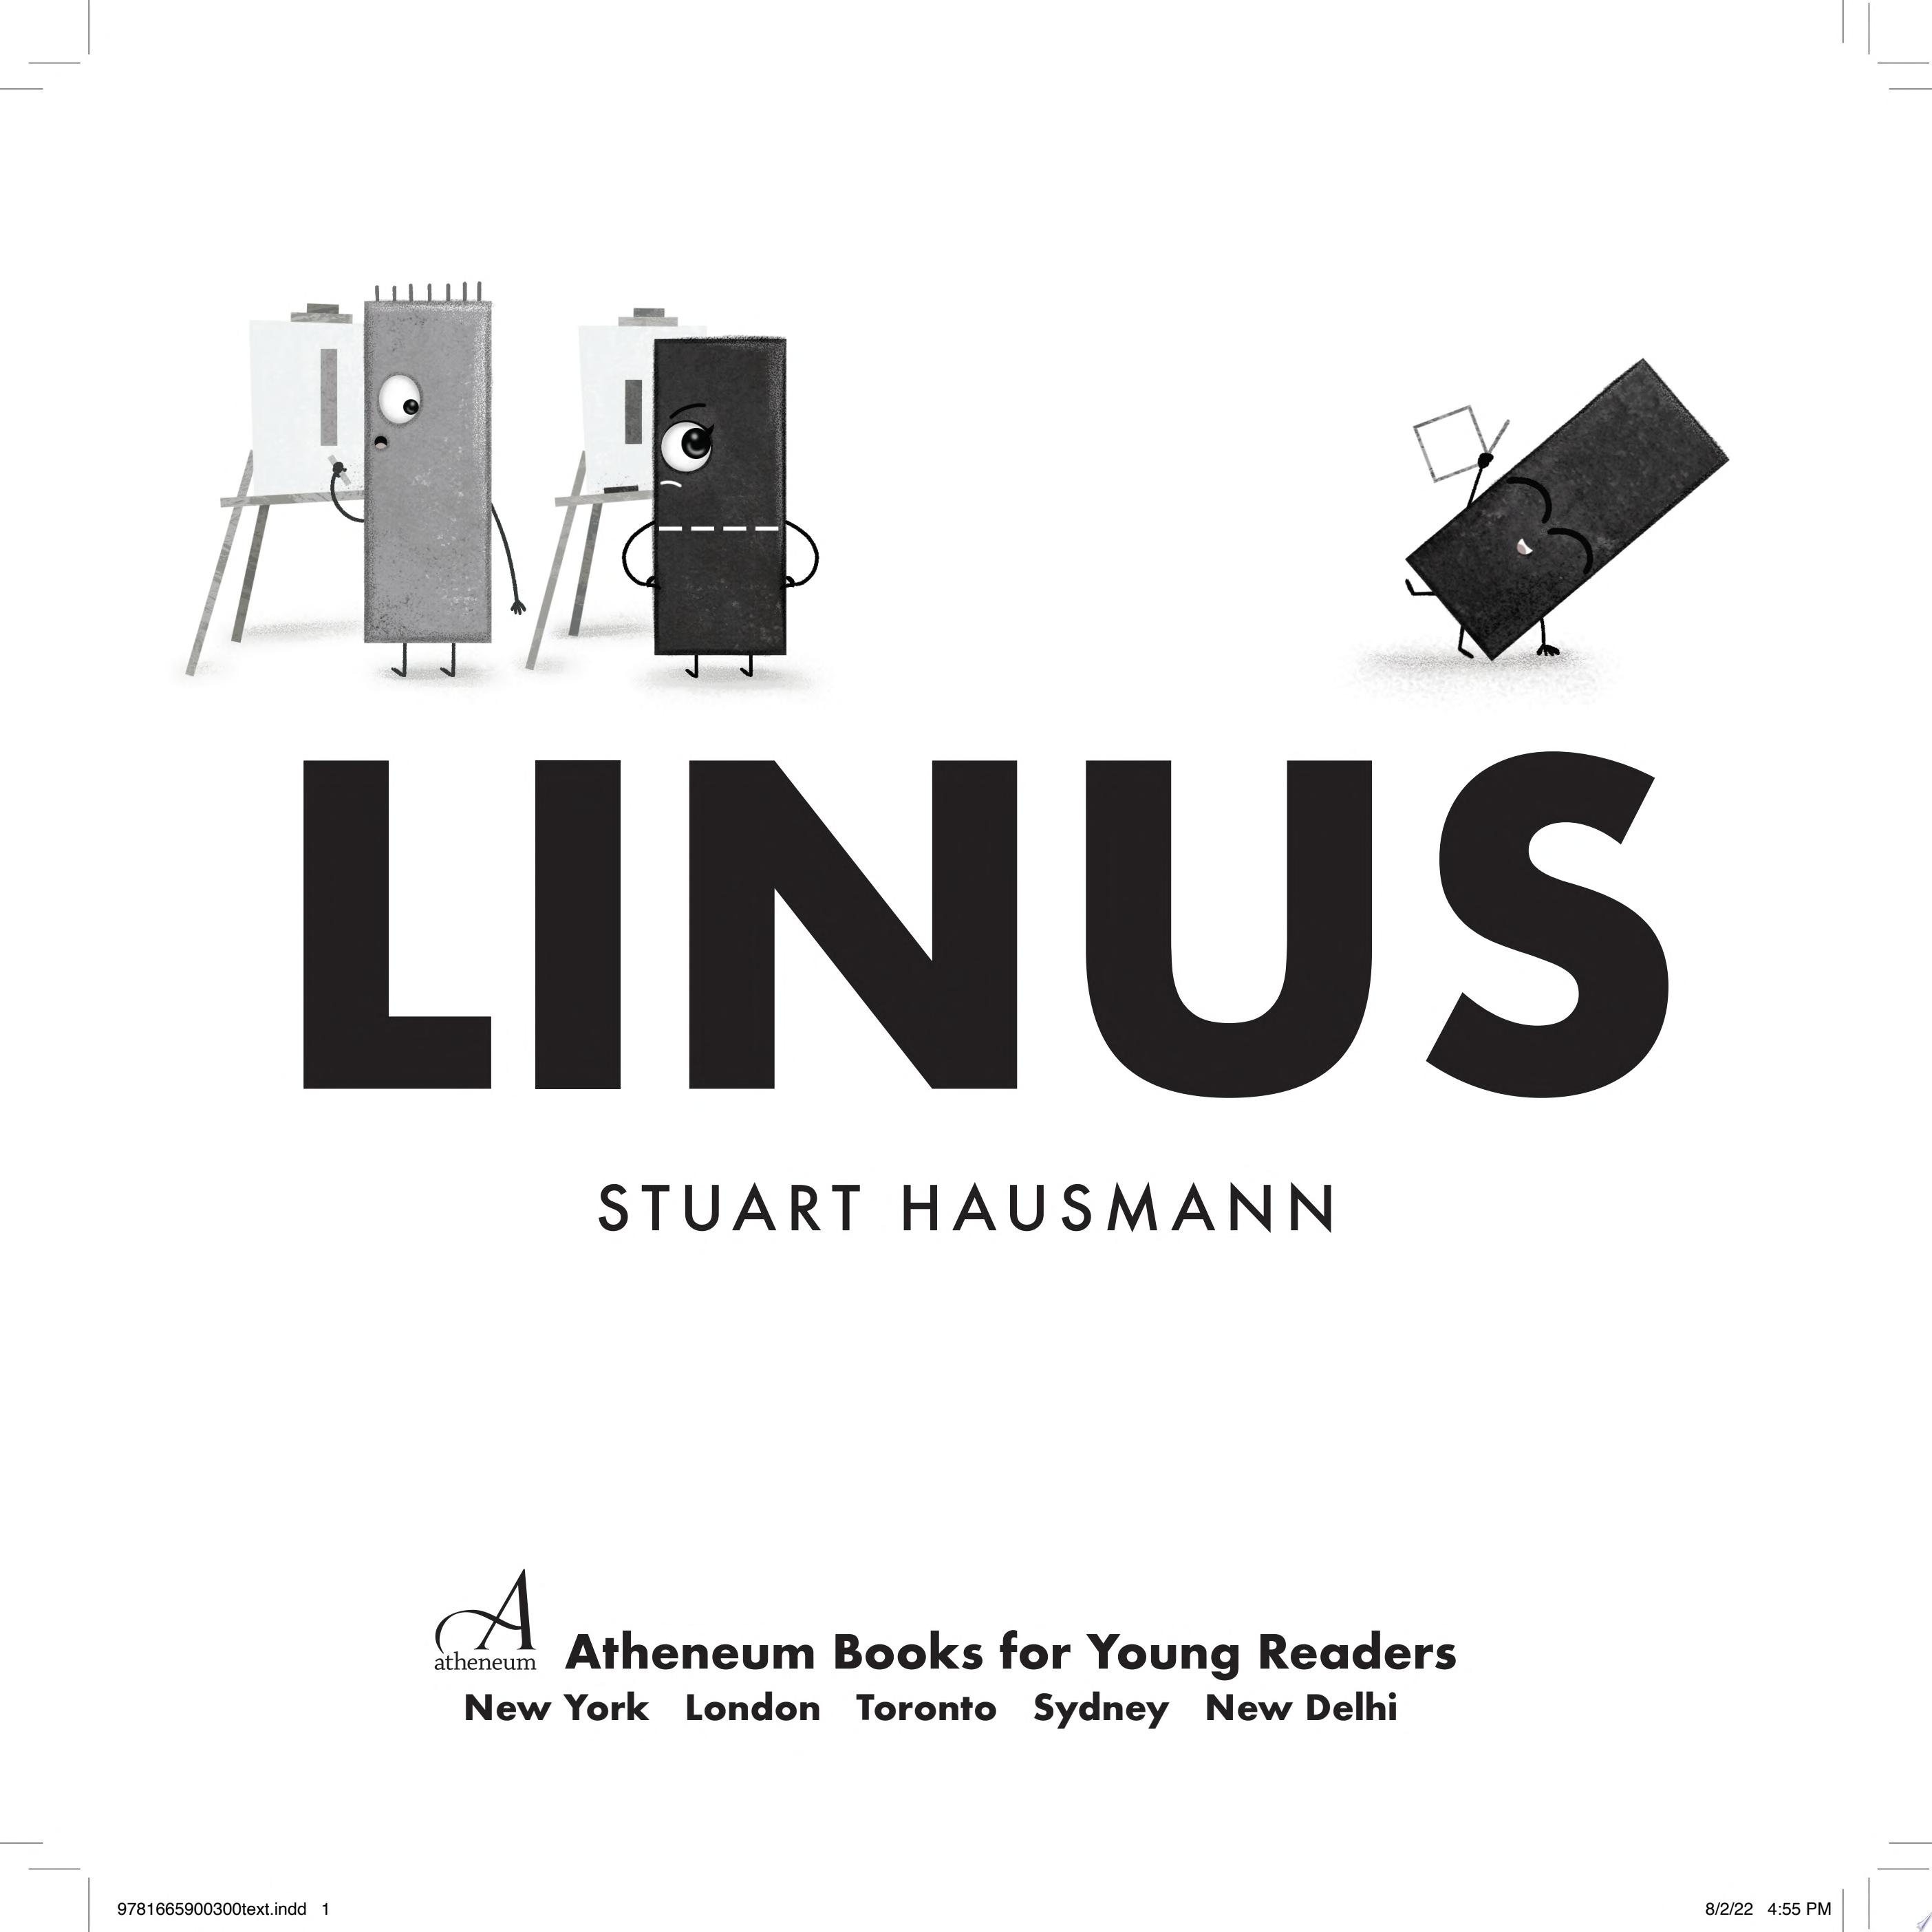 Image for "Linus"